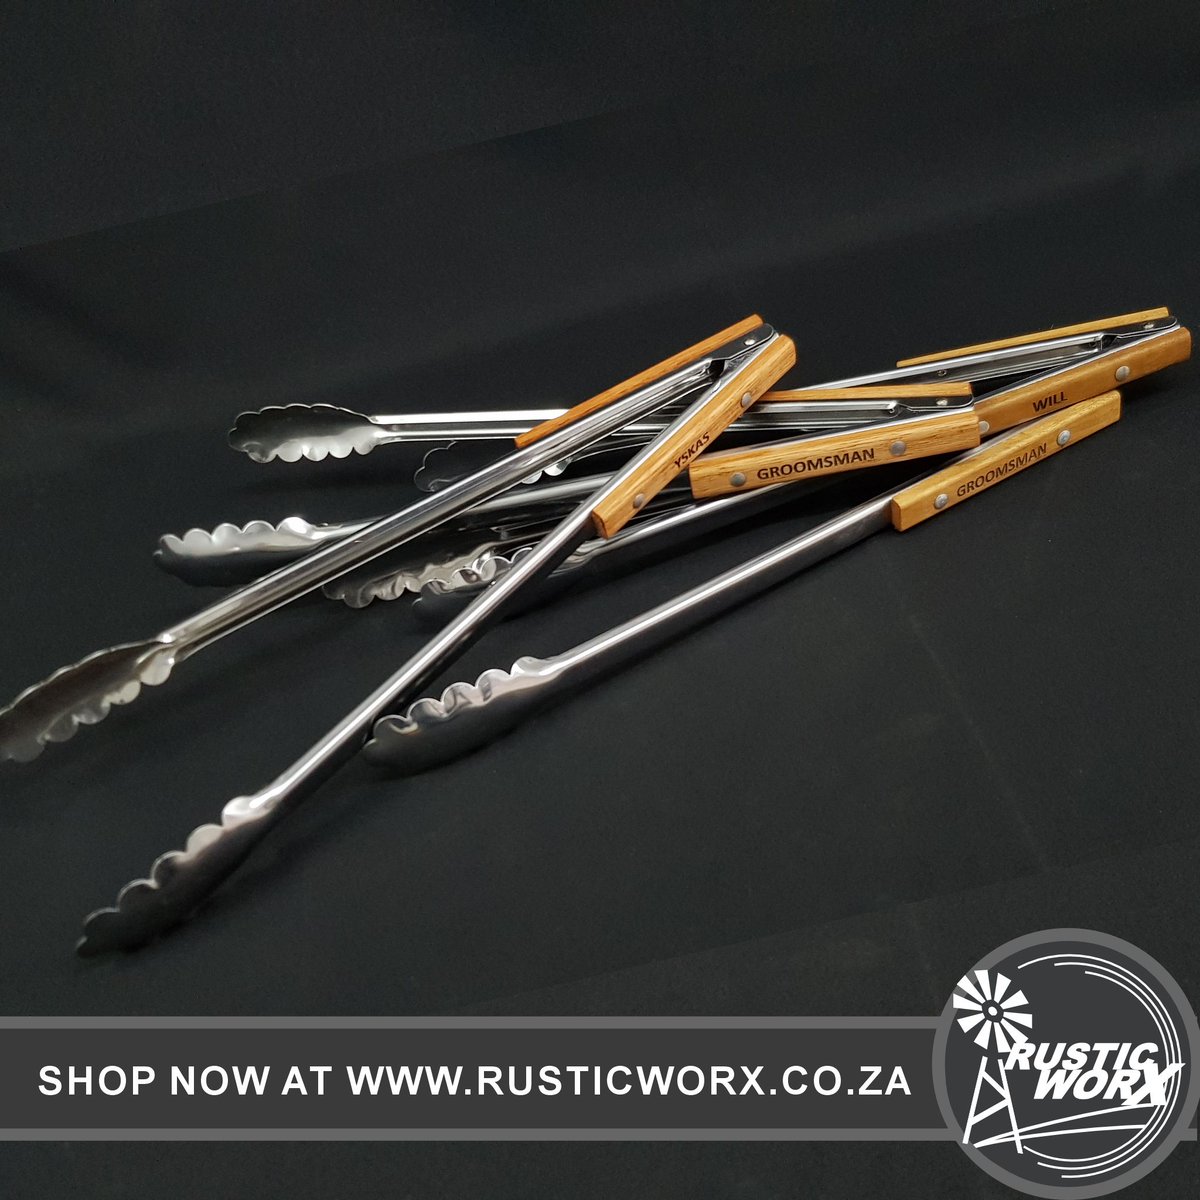 Elevate your grilling game and savor every bite with our custom engraved Braai Tongs. 🍖🔥✨ 
 
Contact us on sales@rusticworx.co.za or see our website rusticworx.co.za 
to order yours now!

#Engraved #BraaiTongs #Braai #BraaiMaster #CustomGifts #RusticWorx